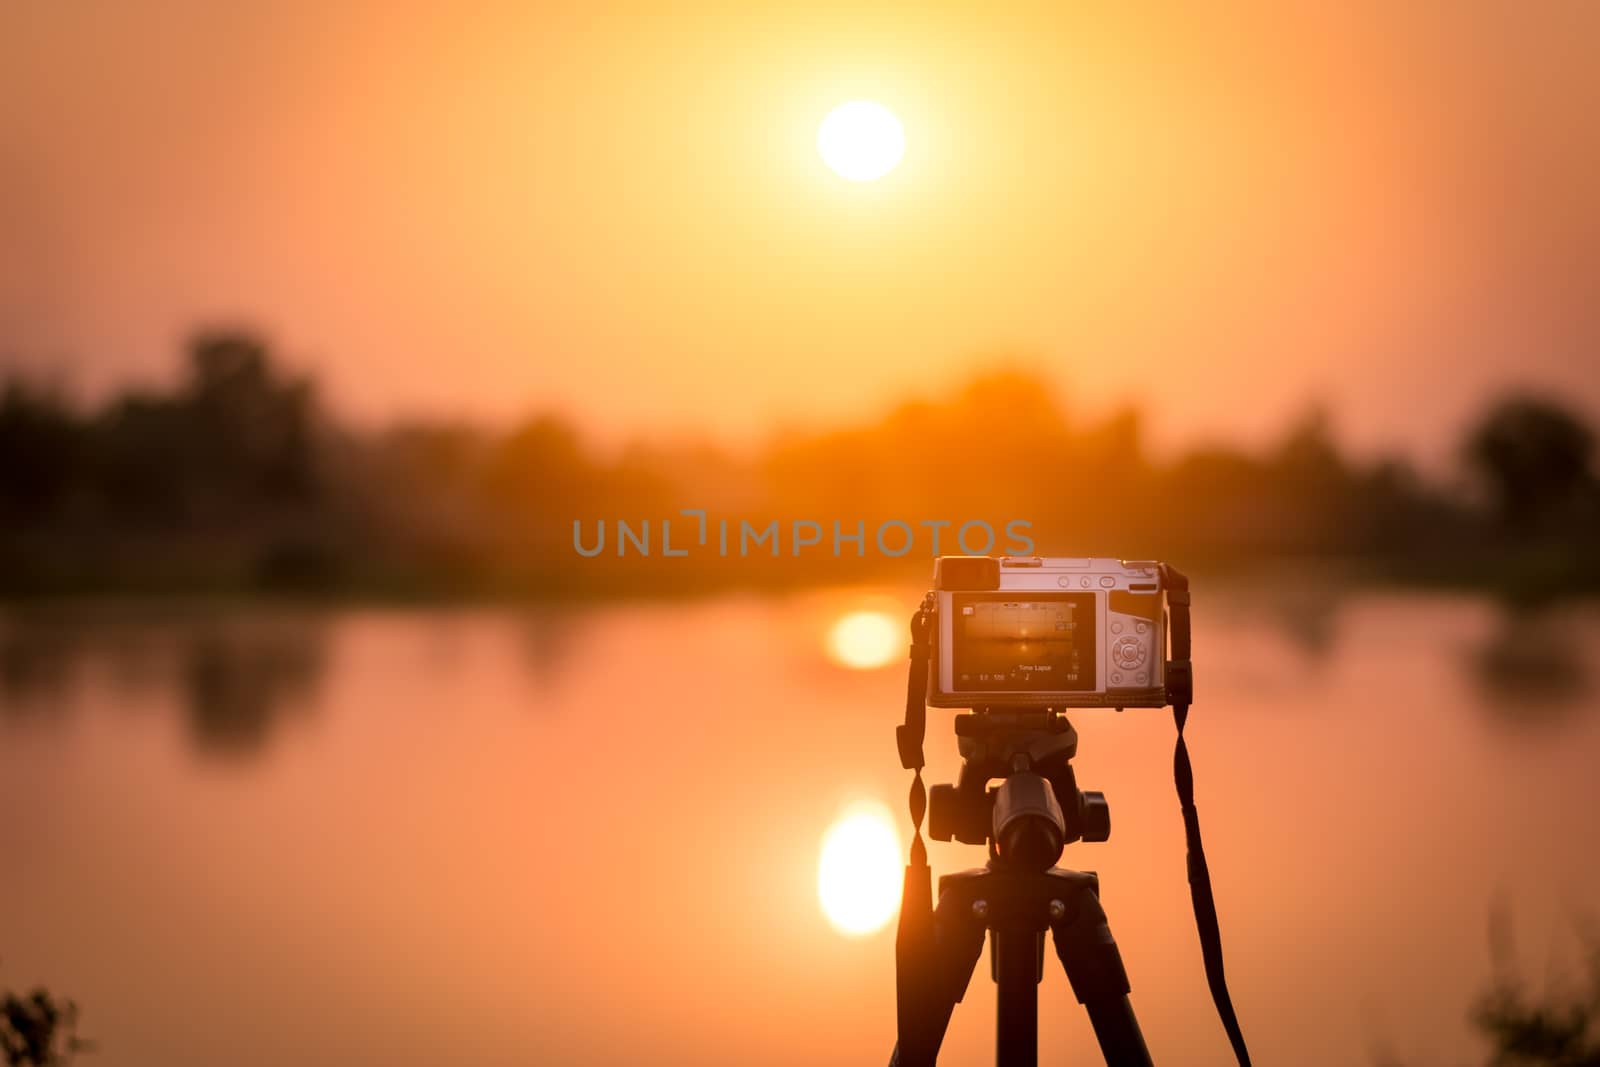 Set the camera on a tripod to record time-lapse video of the sunset.